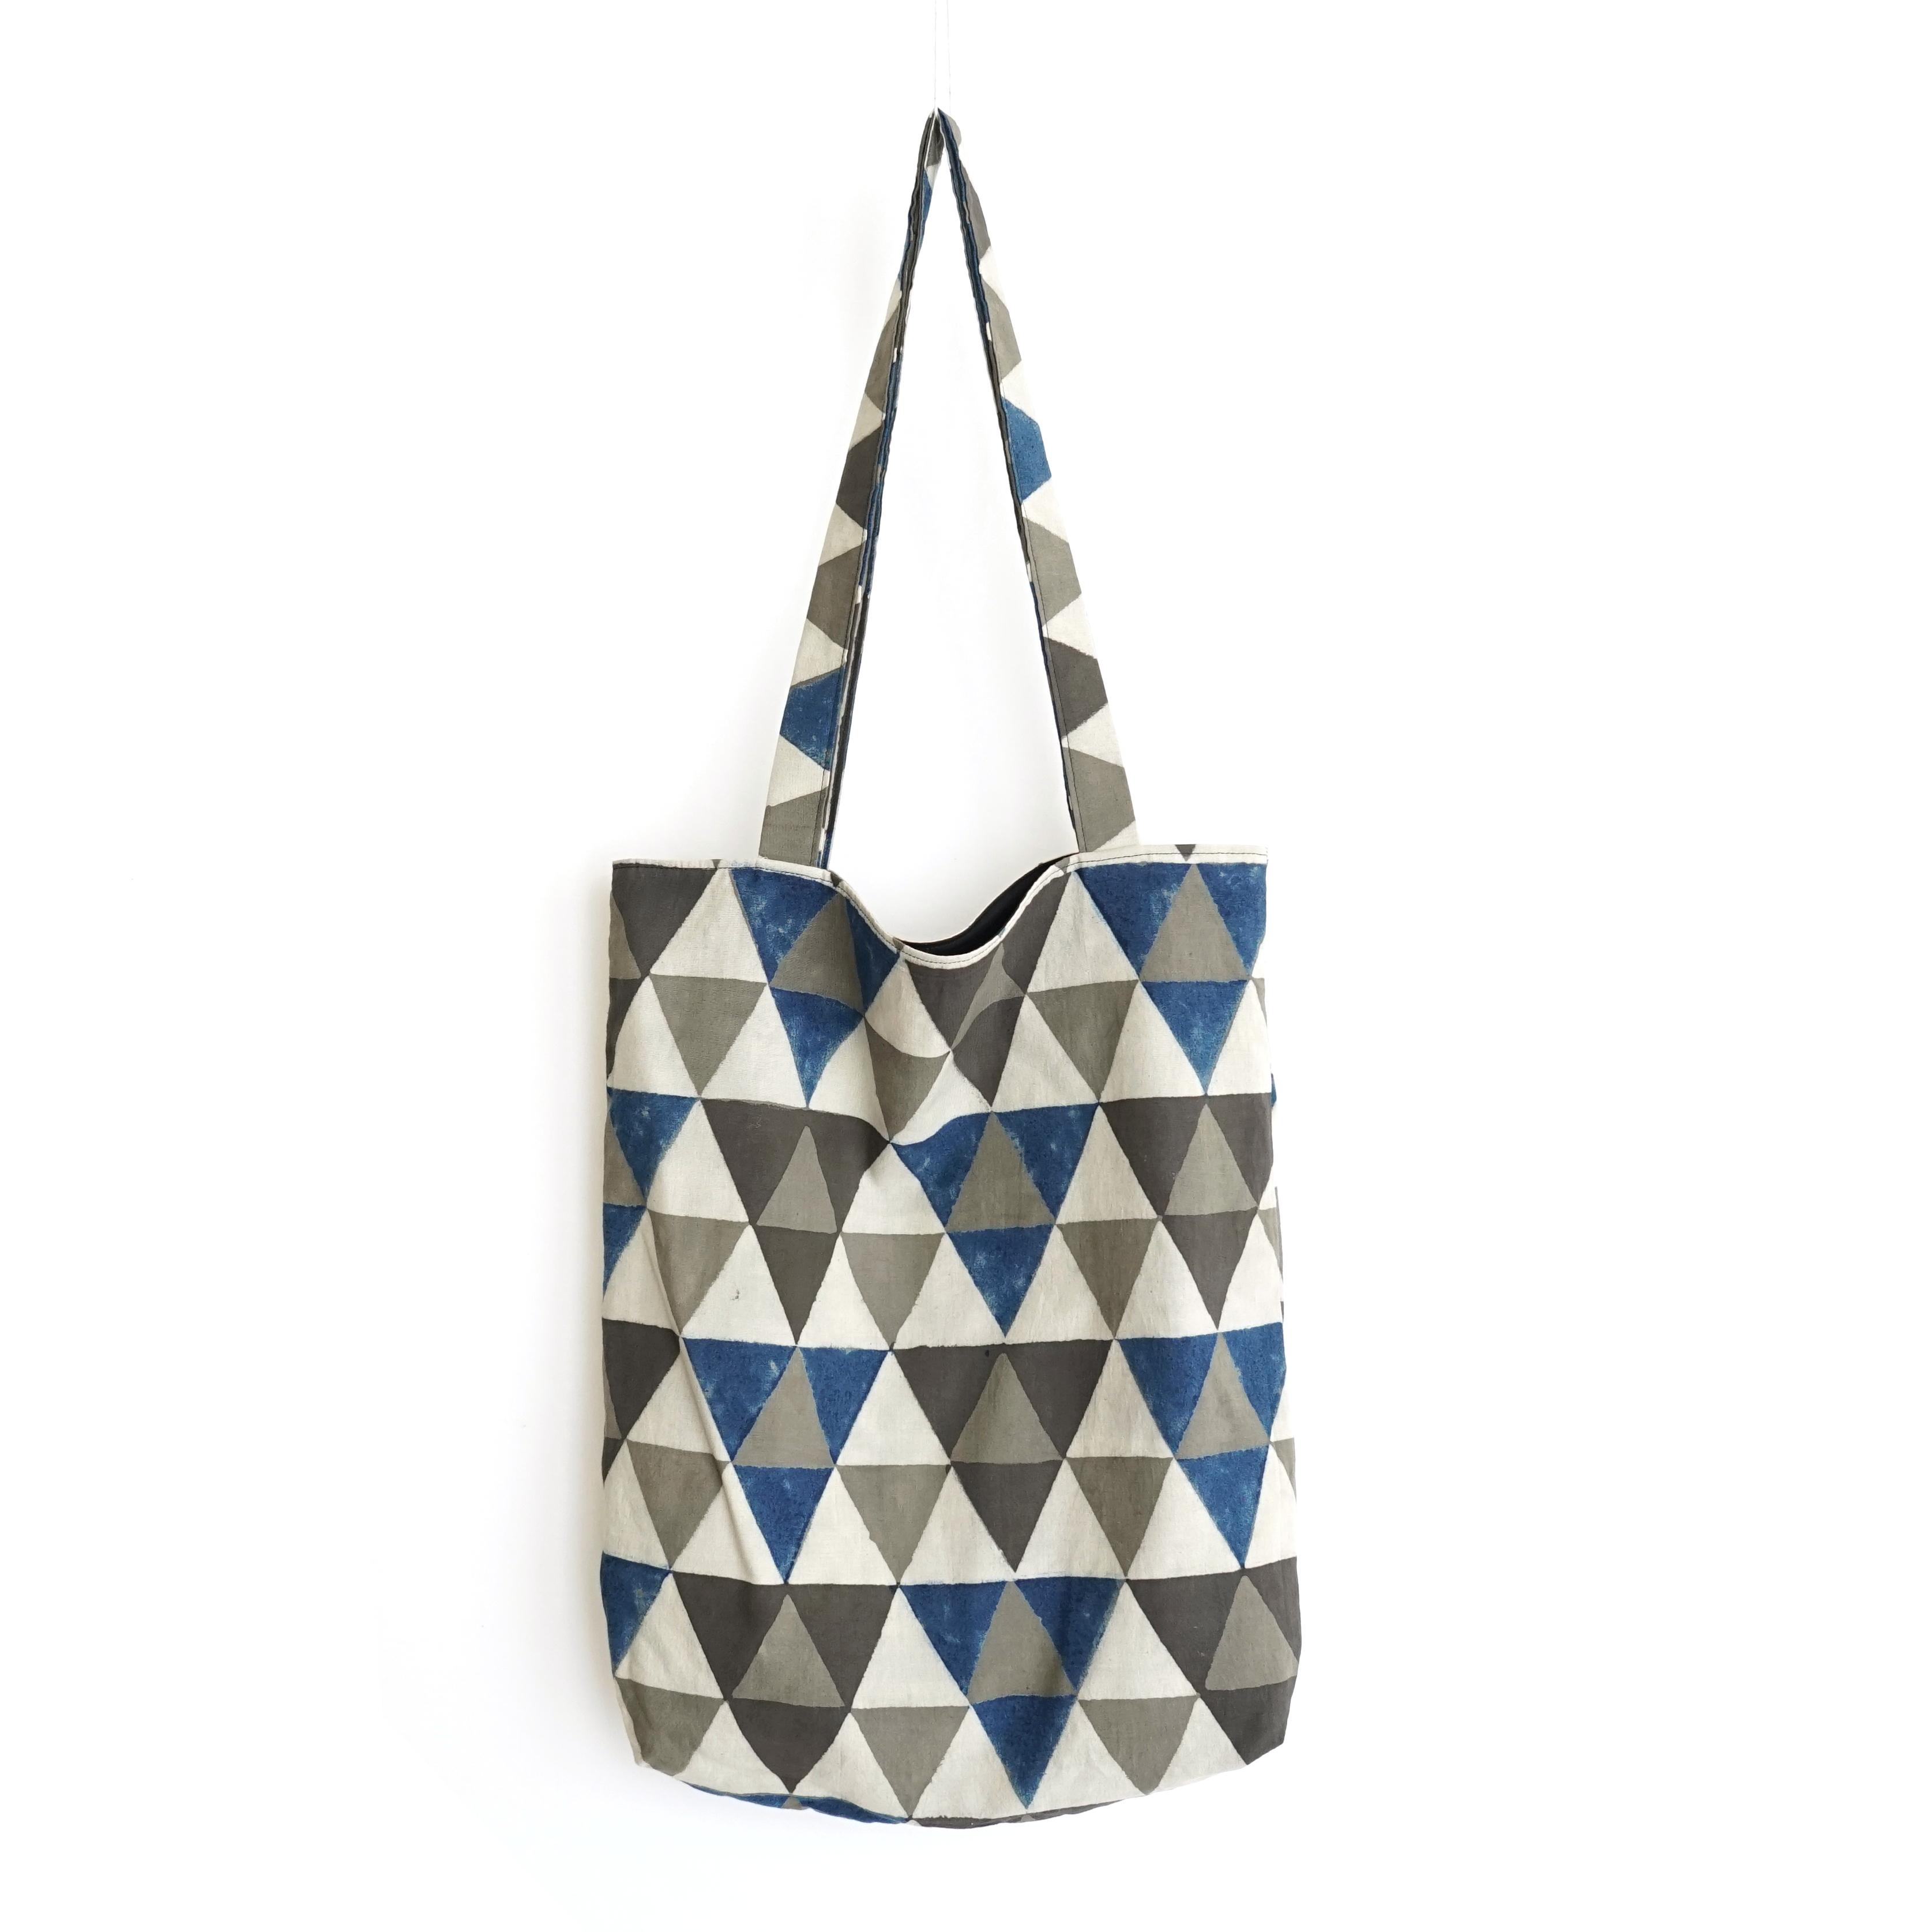 block printed cotton tote bag, natural dye, beige, blue black grey triangle design, lined with black cotton, closed